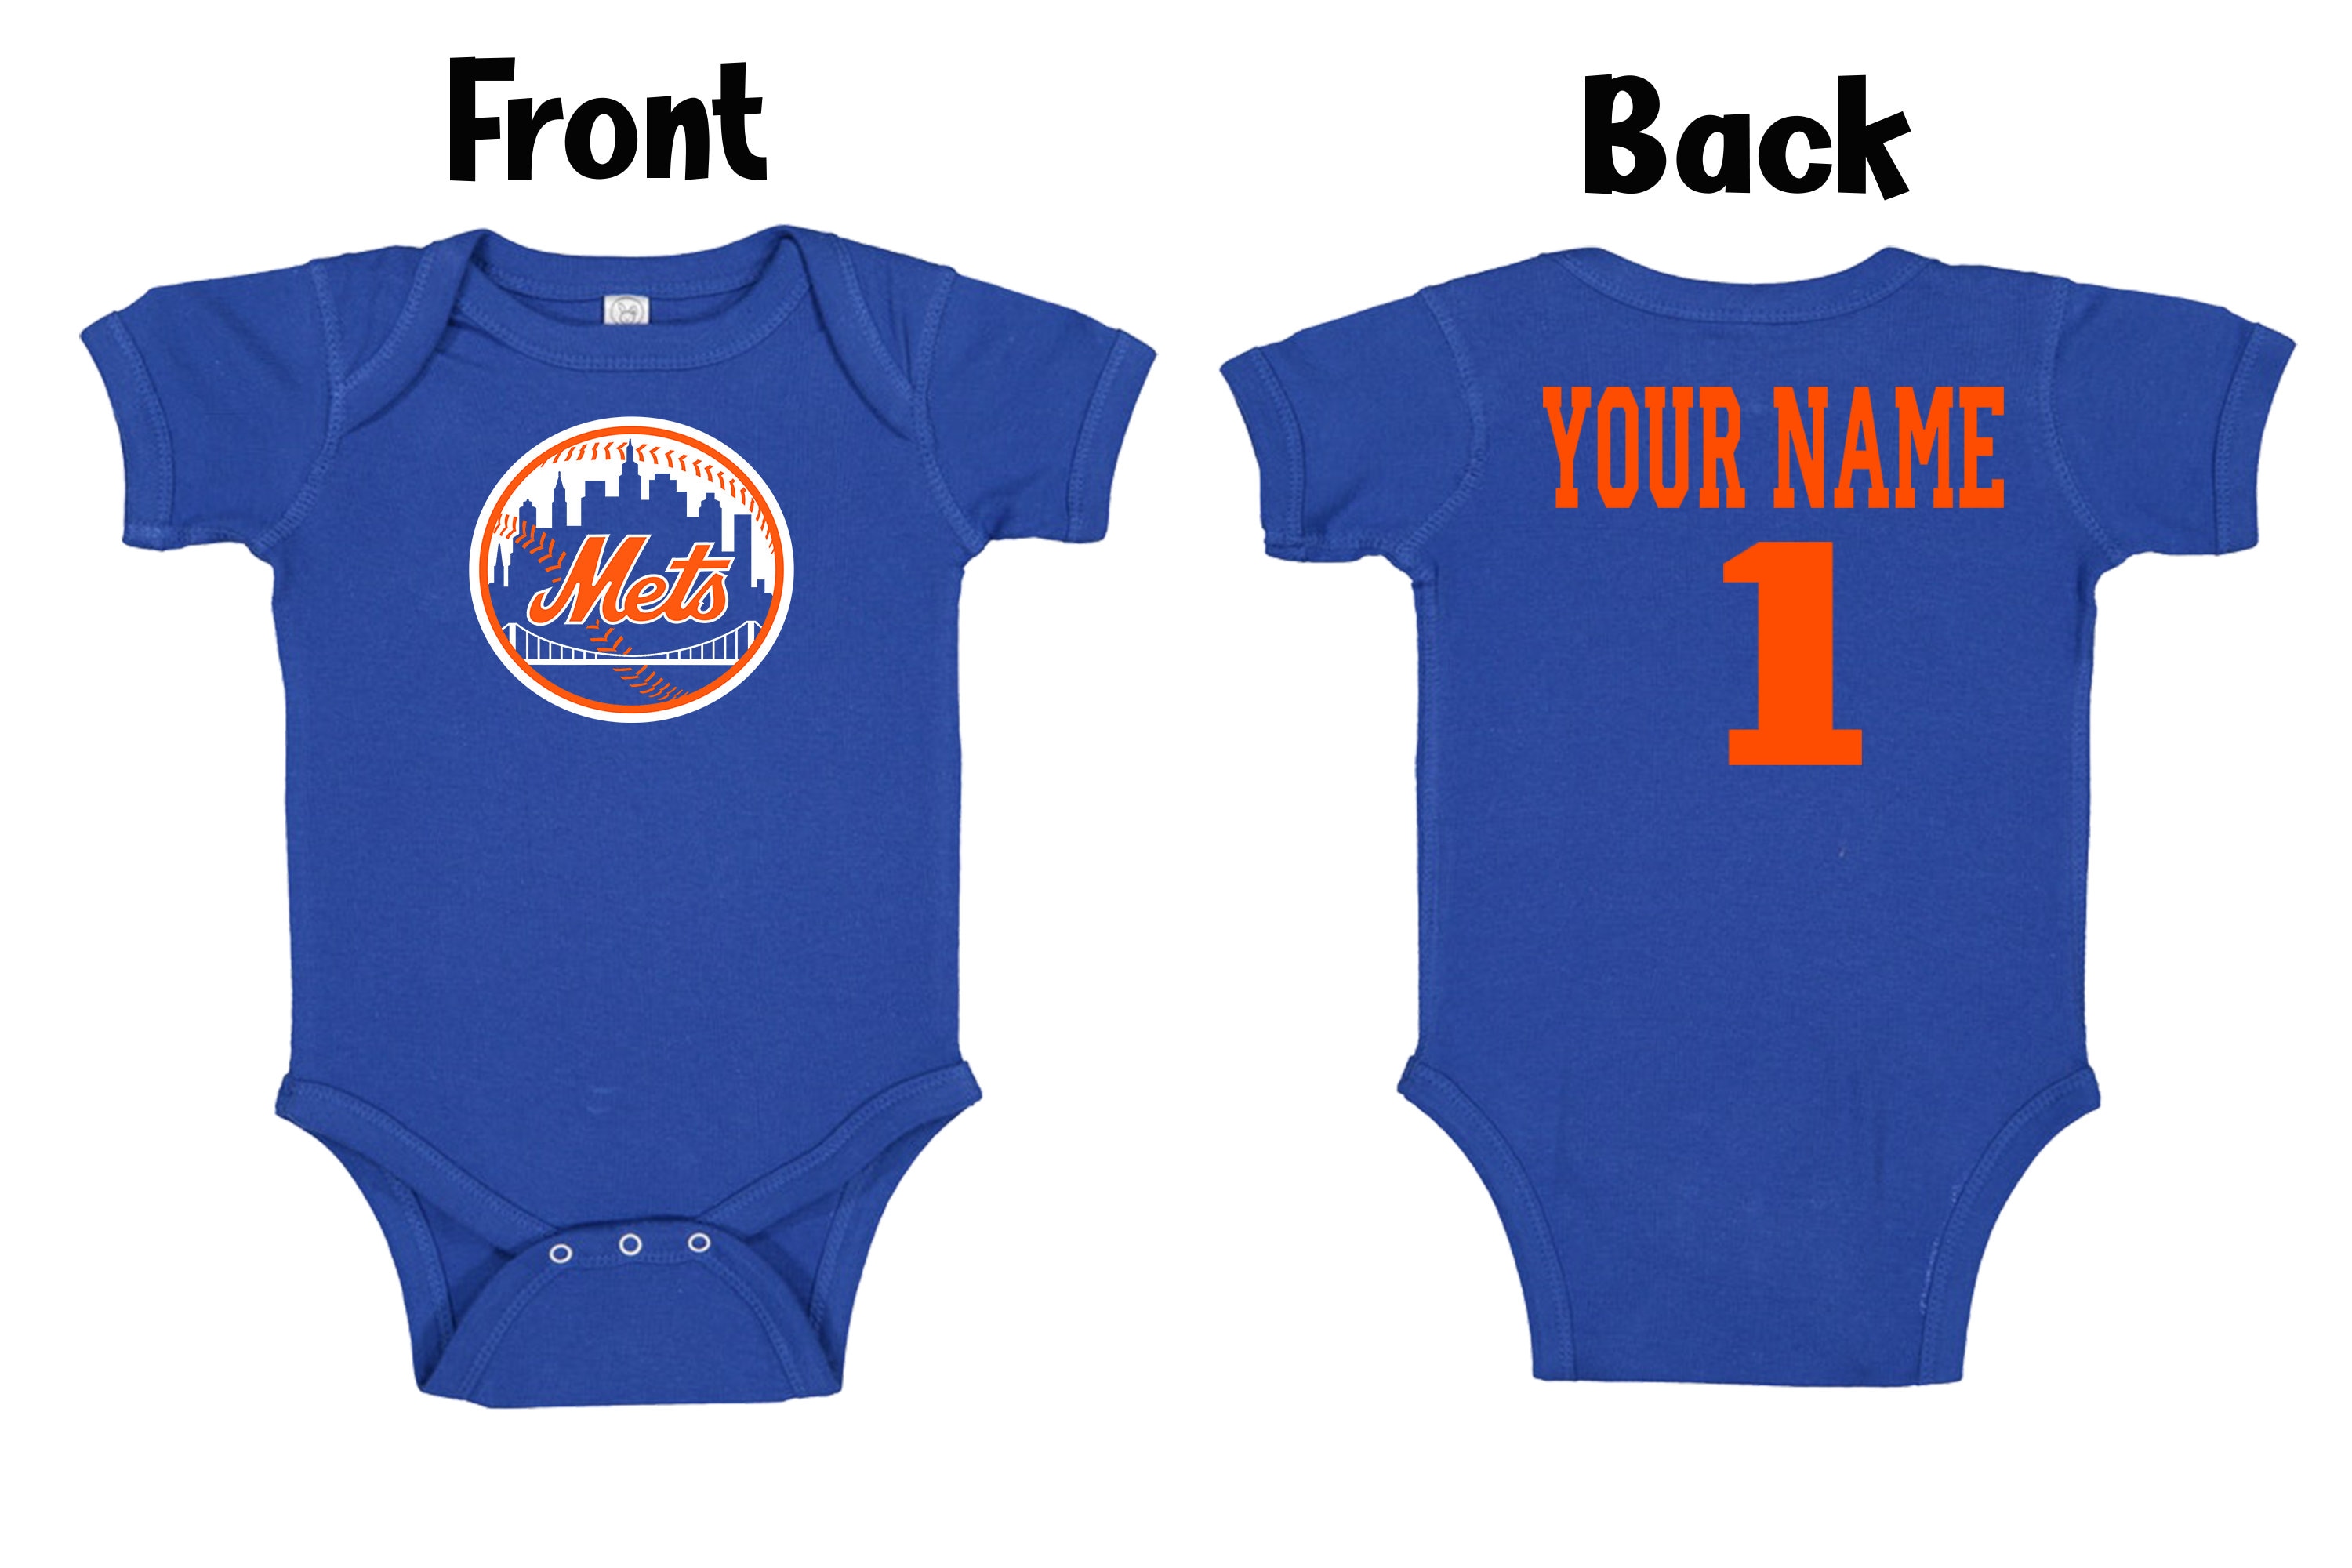 Mets Baby Outfit, Mets Girl's Outfit, Mets, Mets Newborn Outfit, Mets Fan,  Mets Baby, Mets Girl, Newborn Gift, Father's Day Gift, Mets Shirt